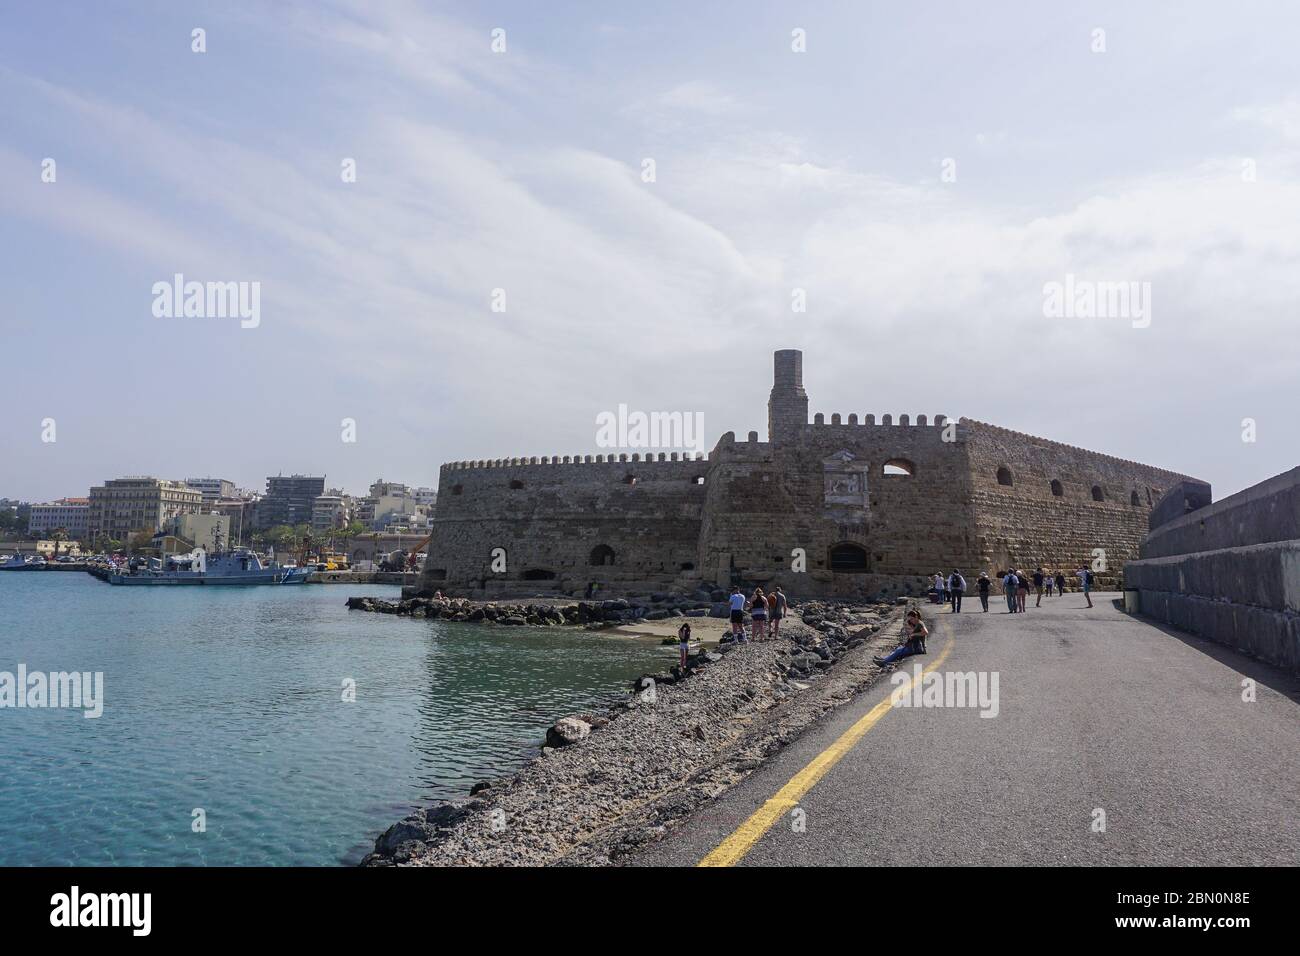 Heraklion, Crete, Greece: Tourists explore the Castello a Mare (Koùles) Fortress, built by the Republic of Venice in the 16th Century. Stock Photo